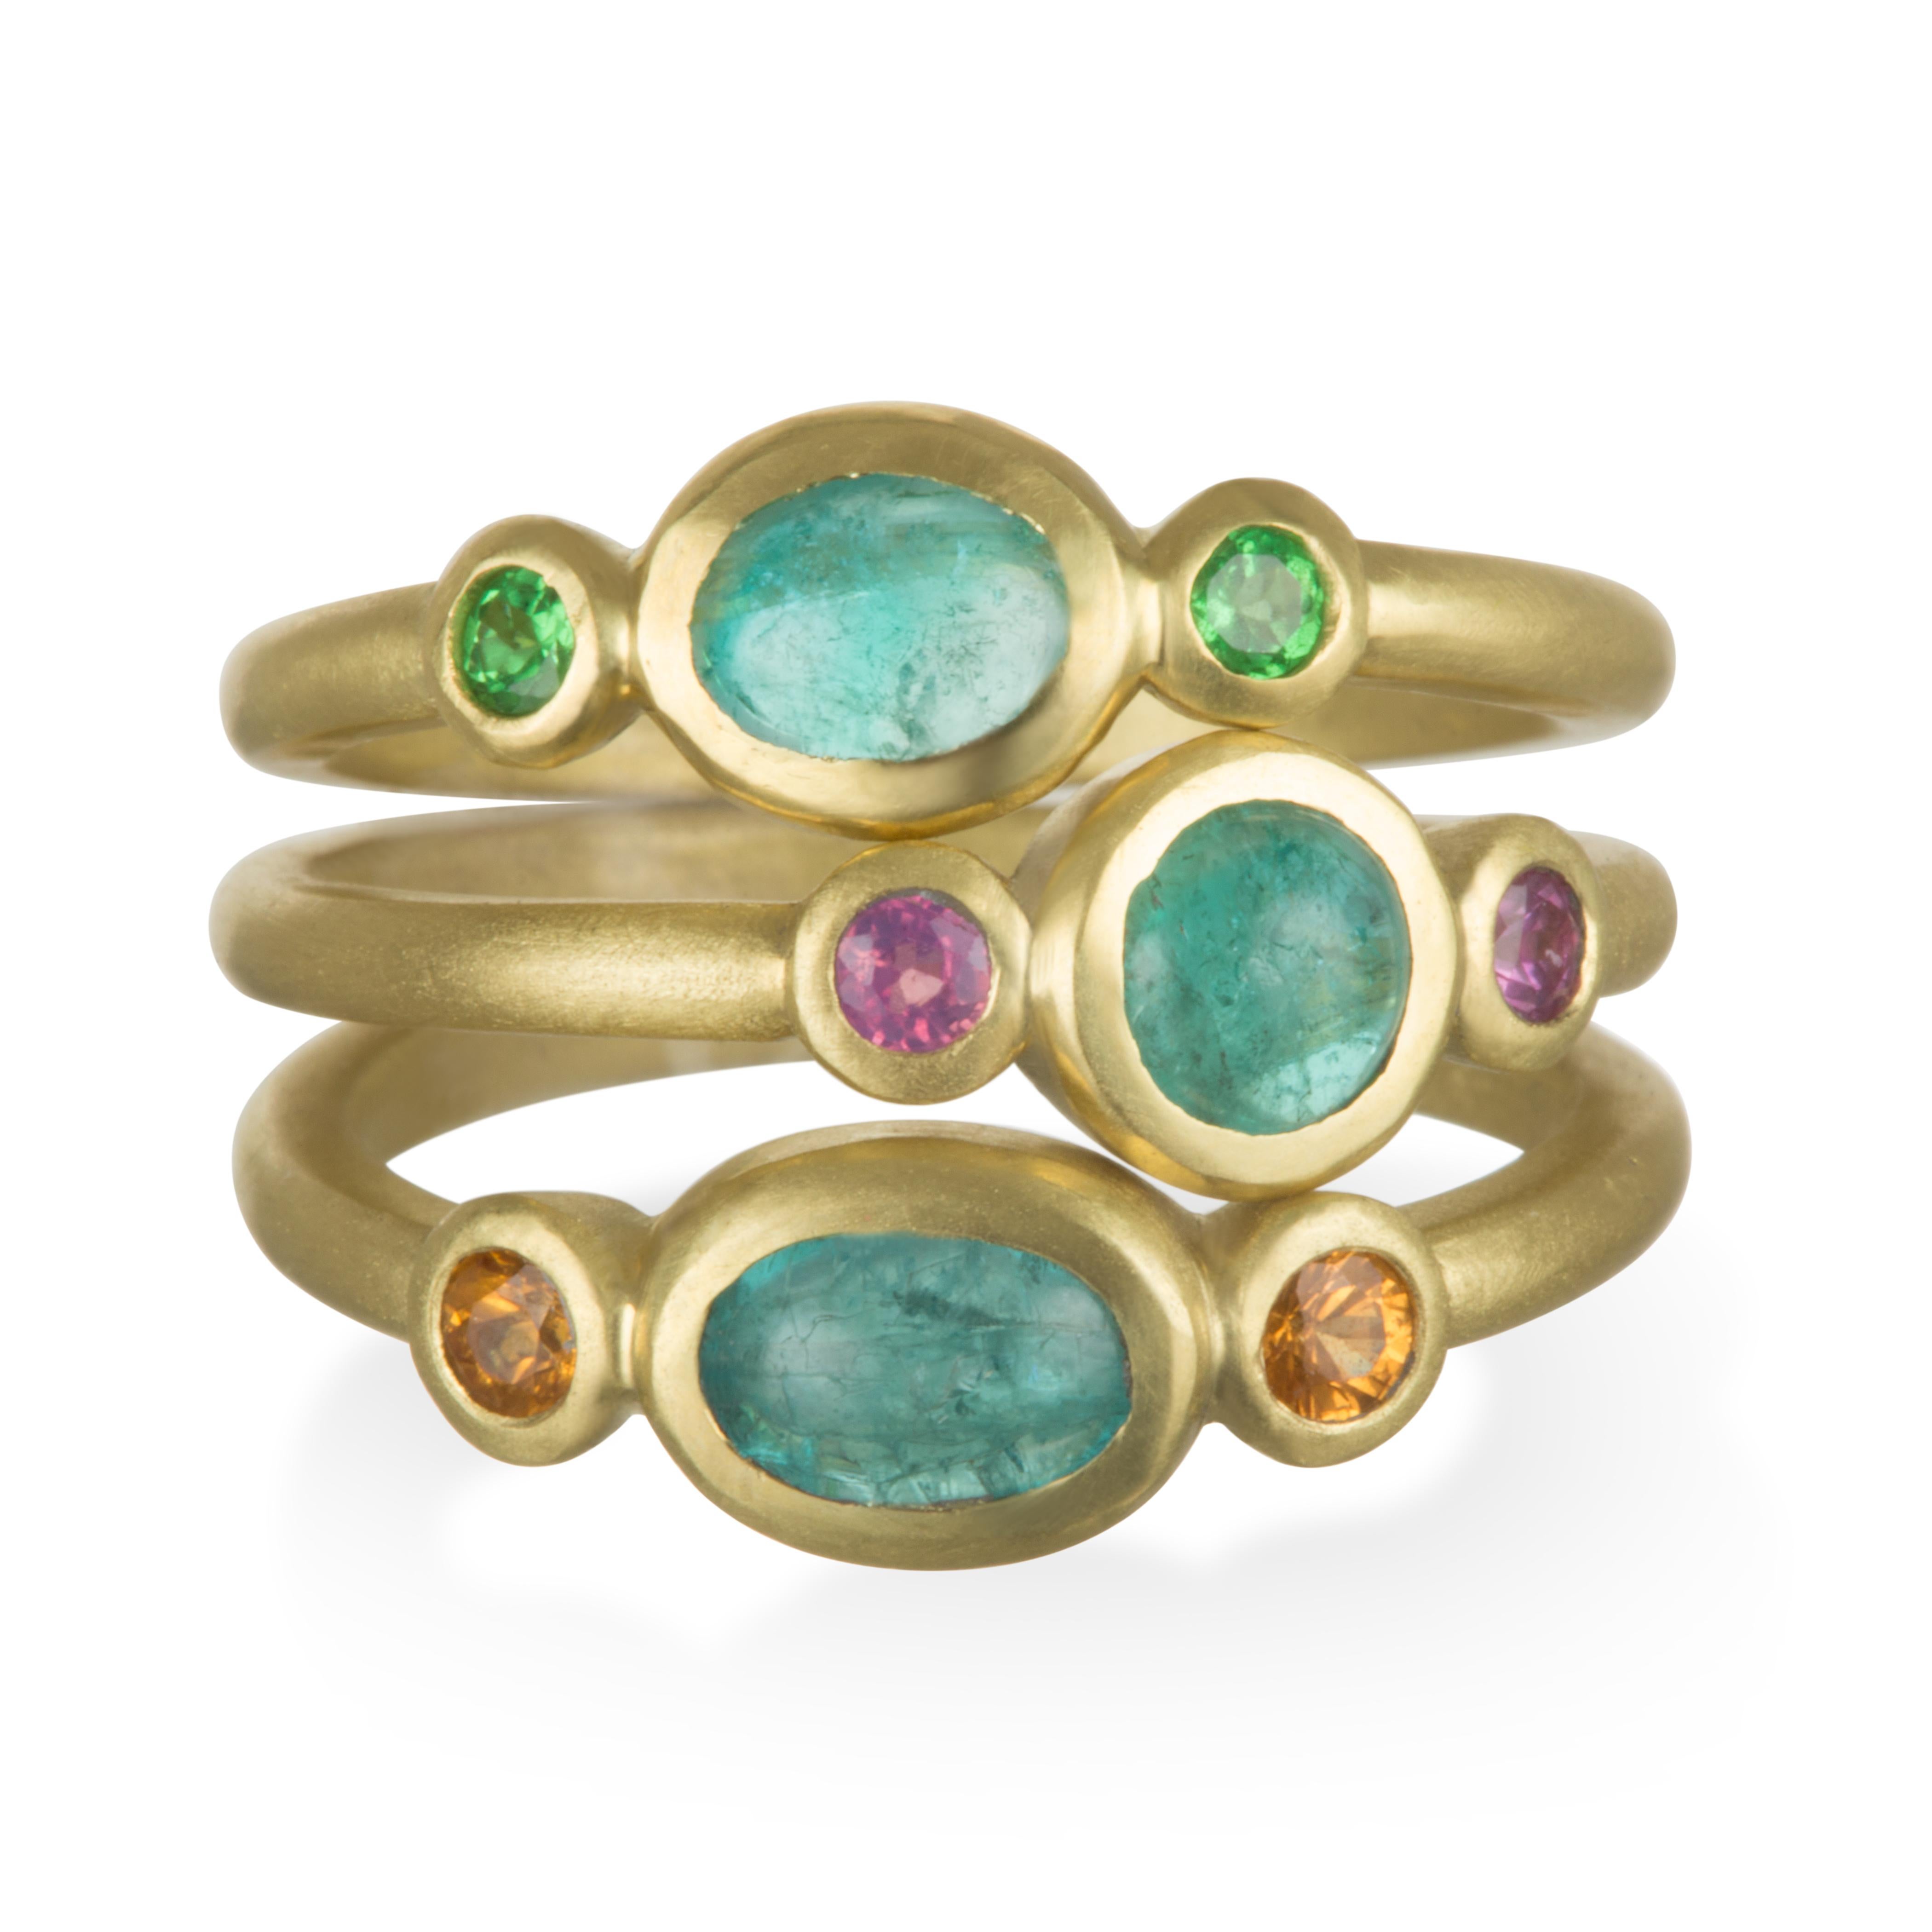 18k Gold Paraiba Tourmaline and Tsavorite Stack Ring.  An explosion of color  - Intense blue-green Paraiba Tourmaline is bezel set with bright green Tsavorite Garnets.
A nod to nature producing one of the most vivid combinations of colors.  Expert